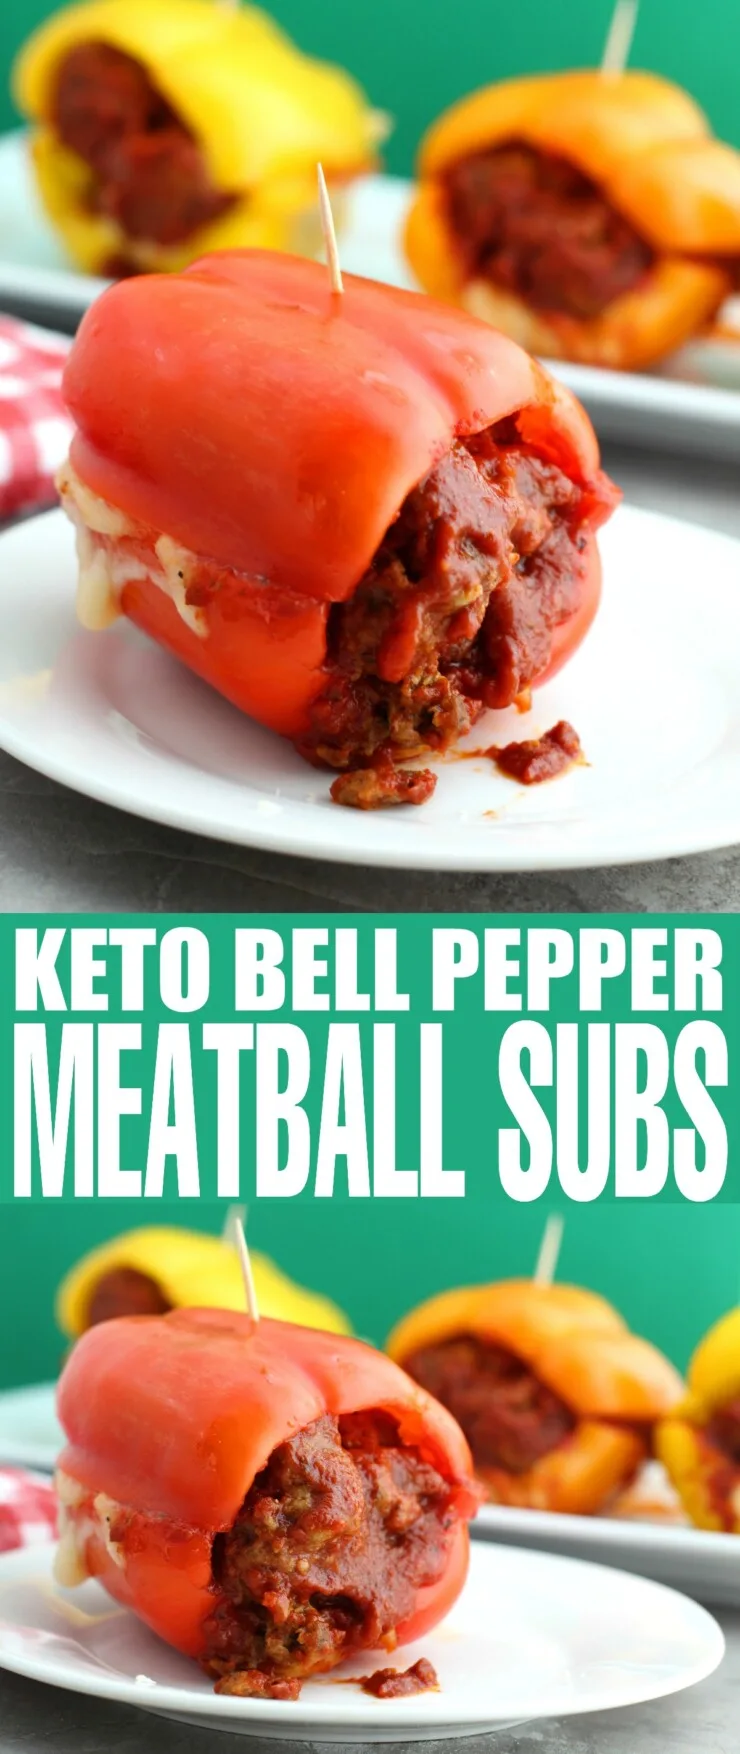 Make dinner fun with these Bell Pepper Meatball Subs - a delicious low carb meal!